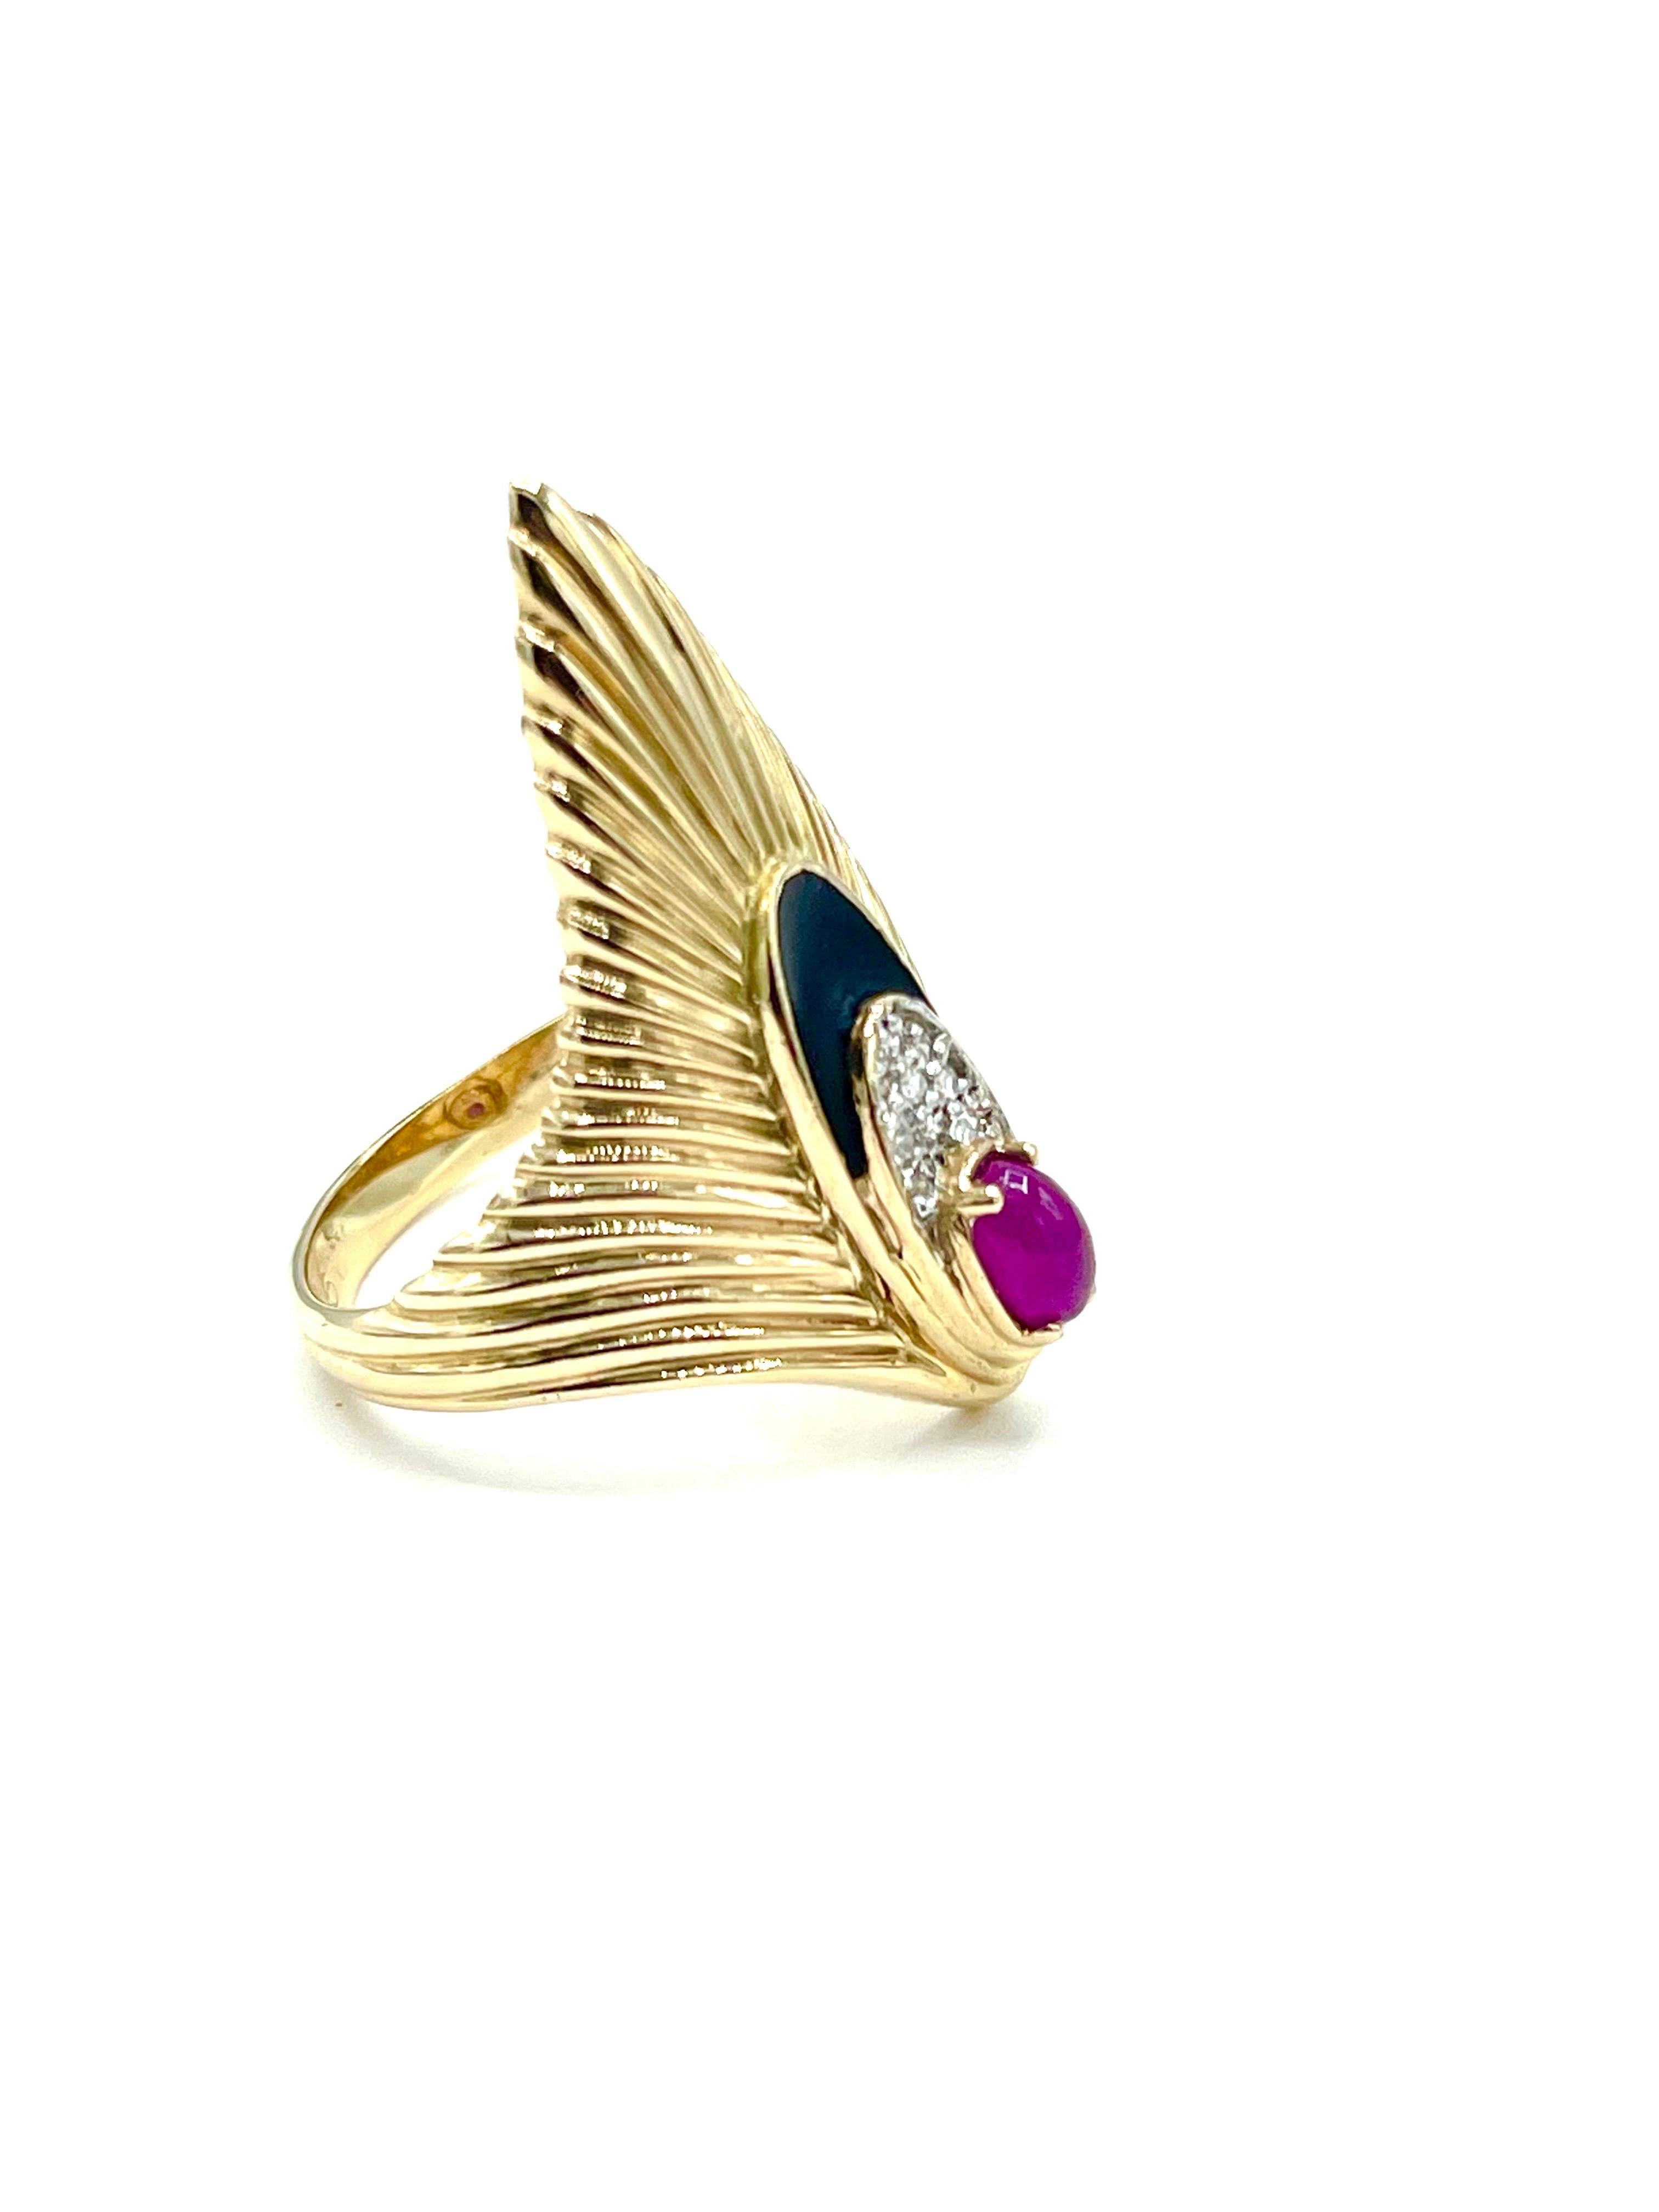 Women's or Men's Erté Rayonnement Ruby Diamond, and Enamel Yellow Gold Cocktail Ring